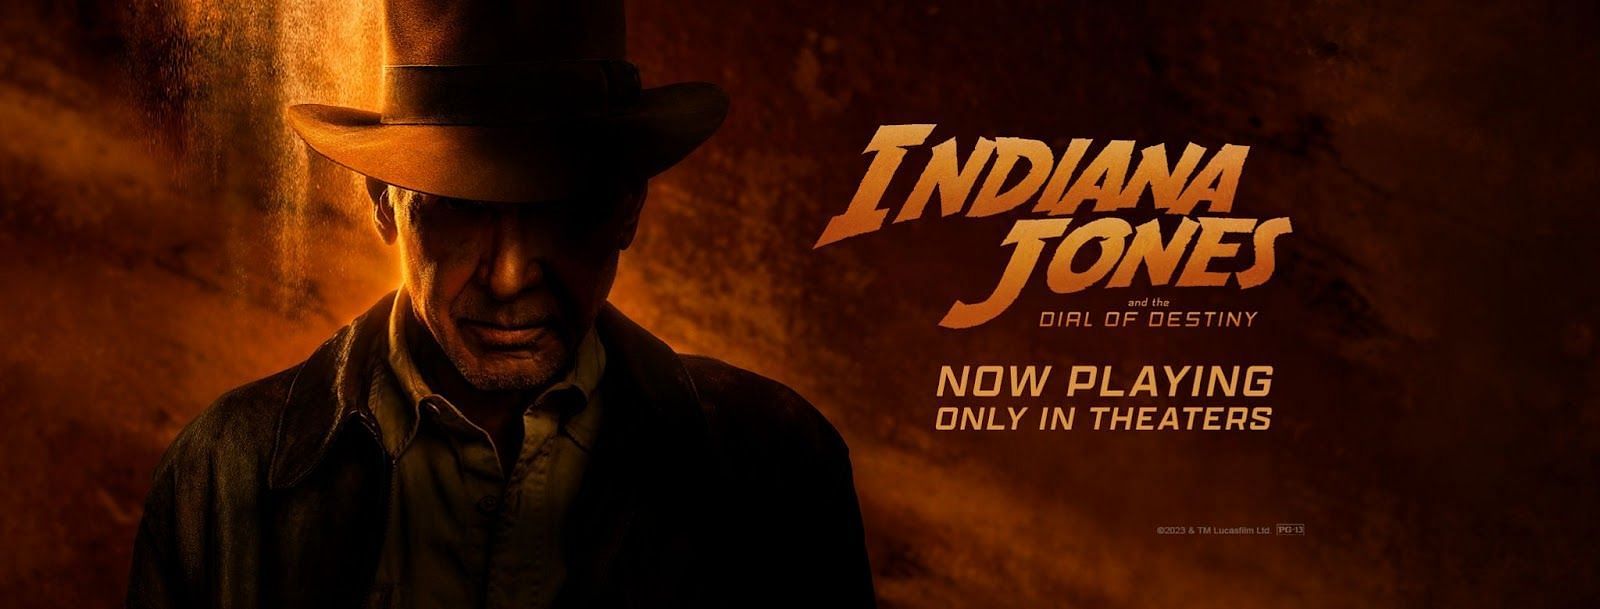 When does the new Indiana Jones movie come out?